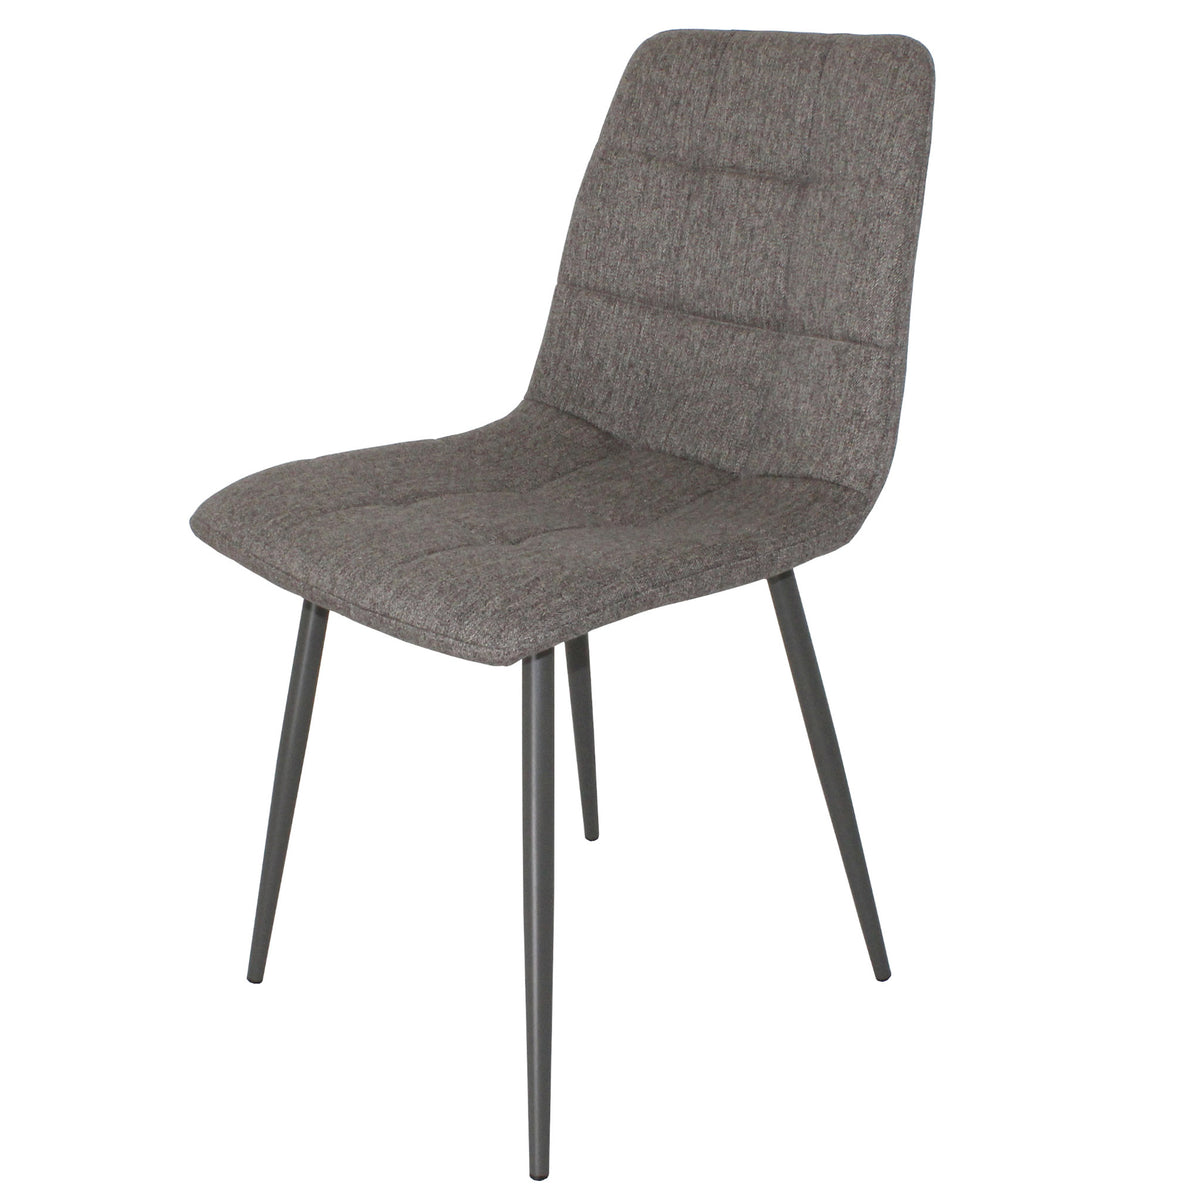 Olivia Dark Grey Faux Leather Padded Dining Chair from Roseland